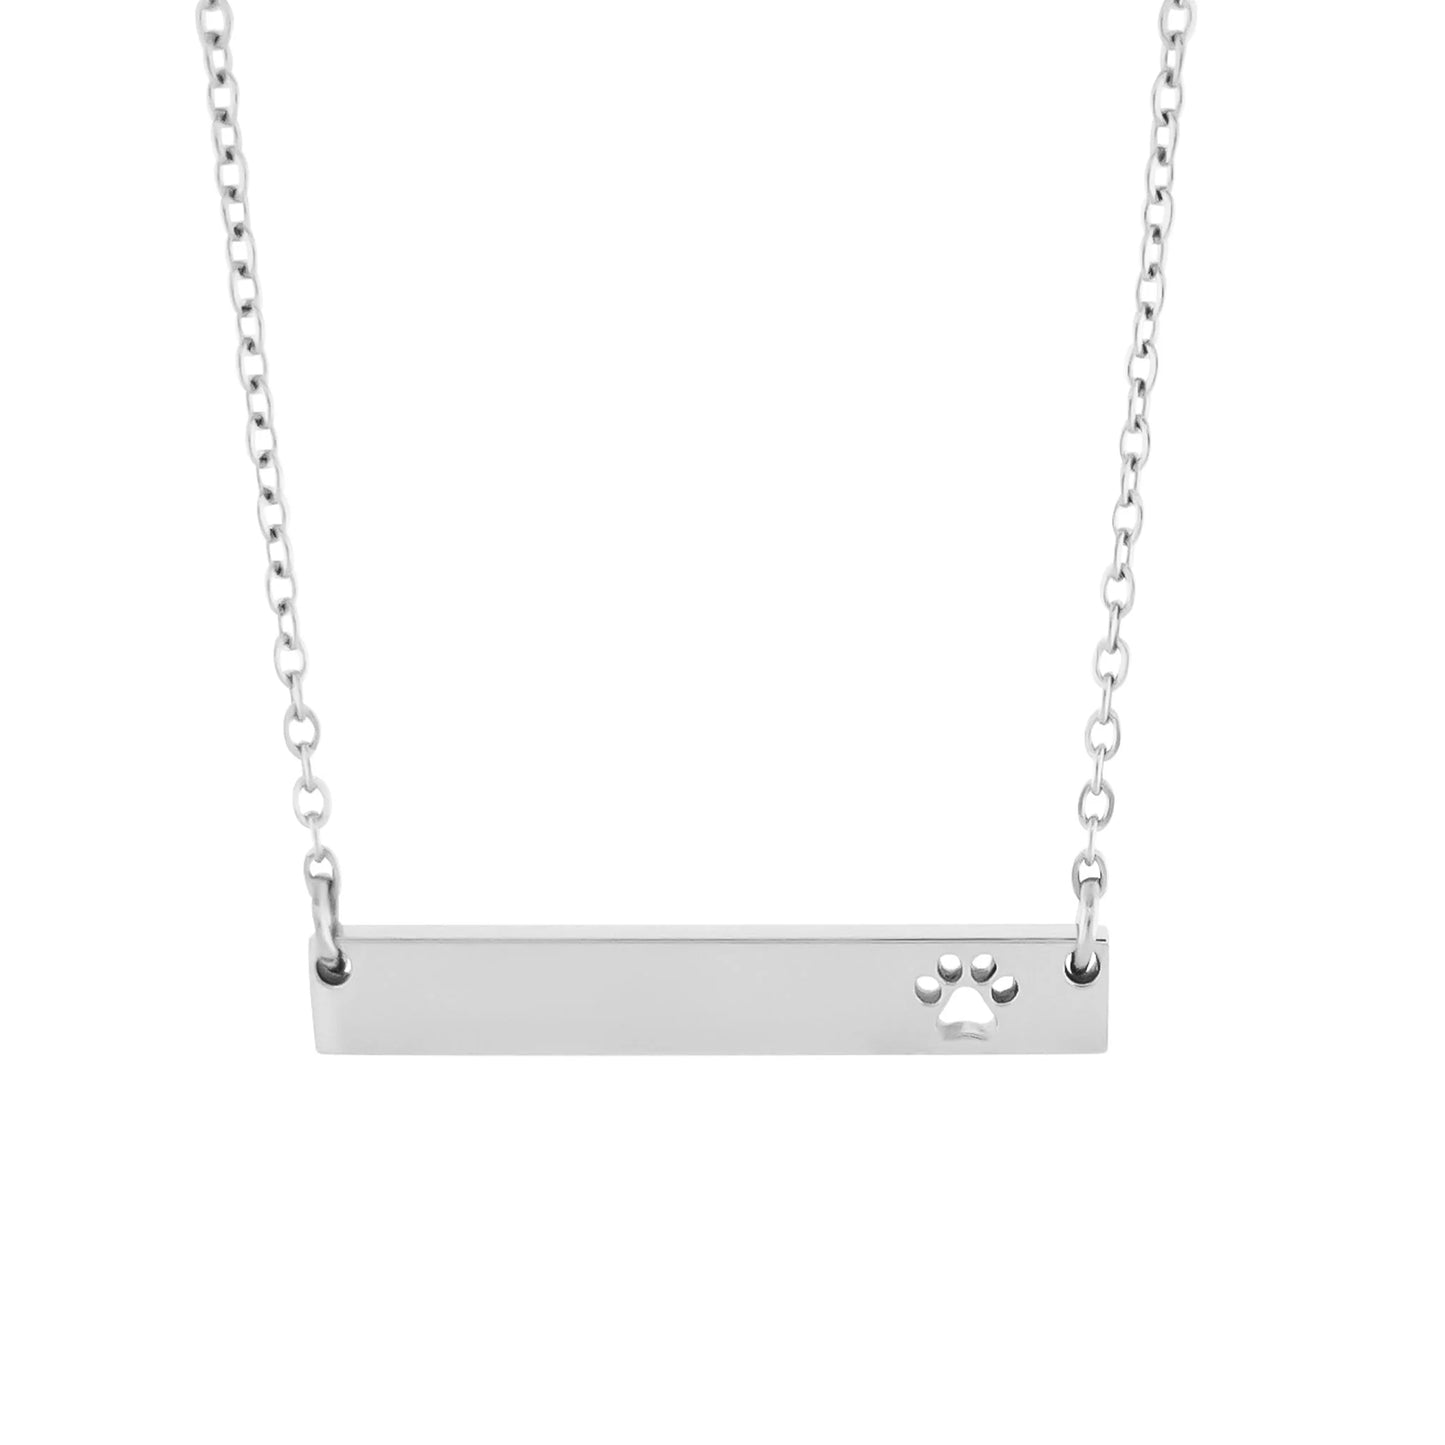 Personalized Paw Print Bar Necklace